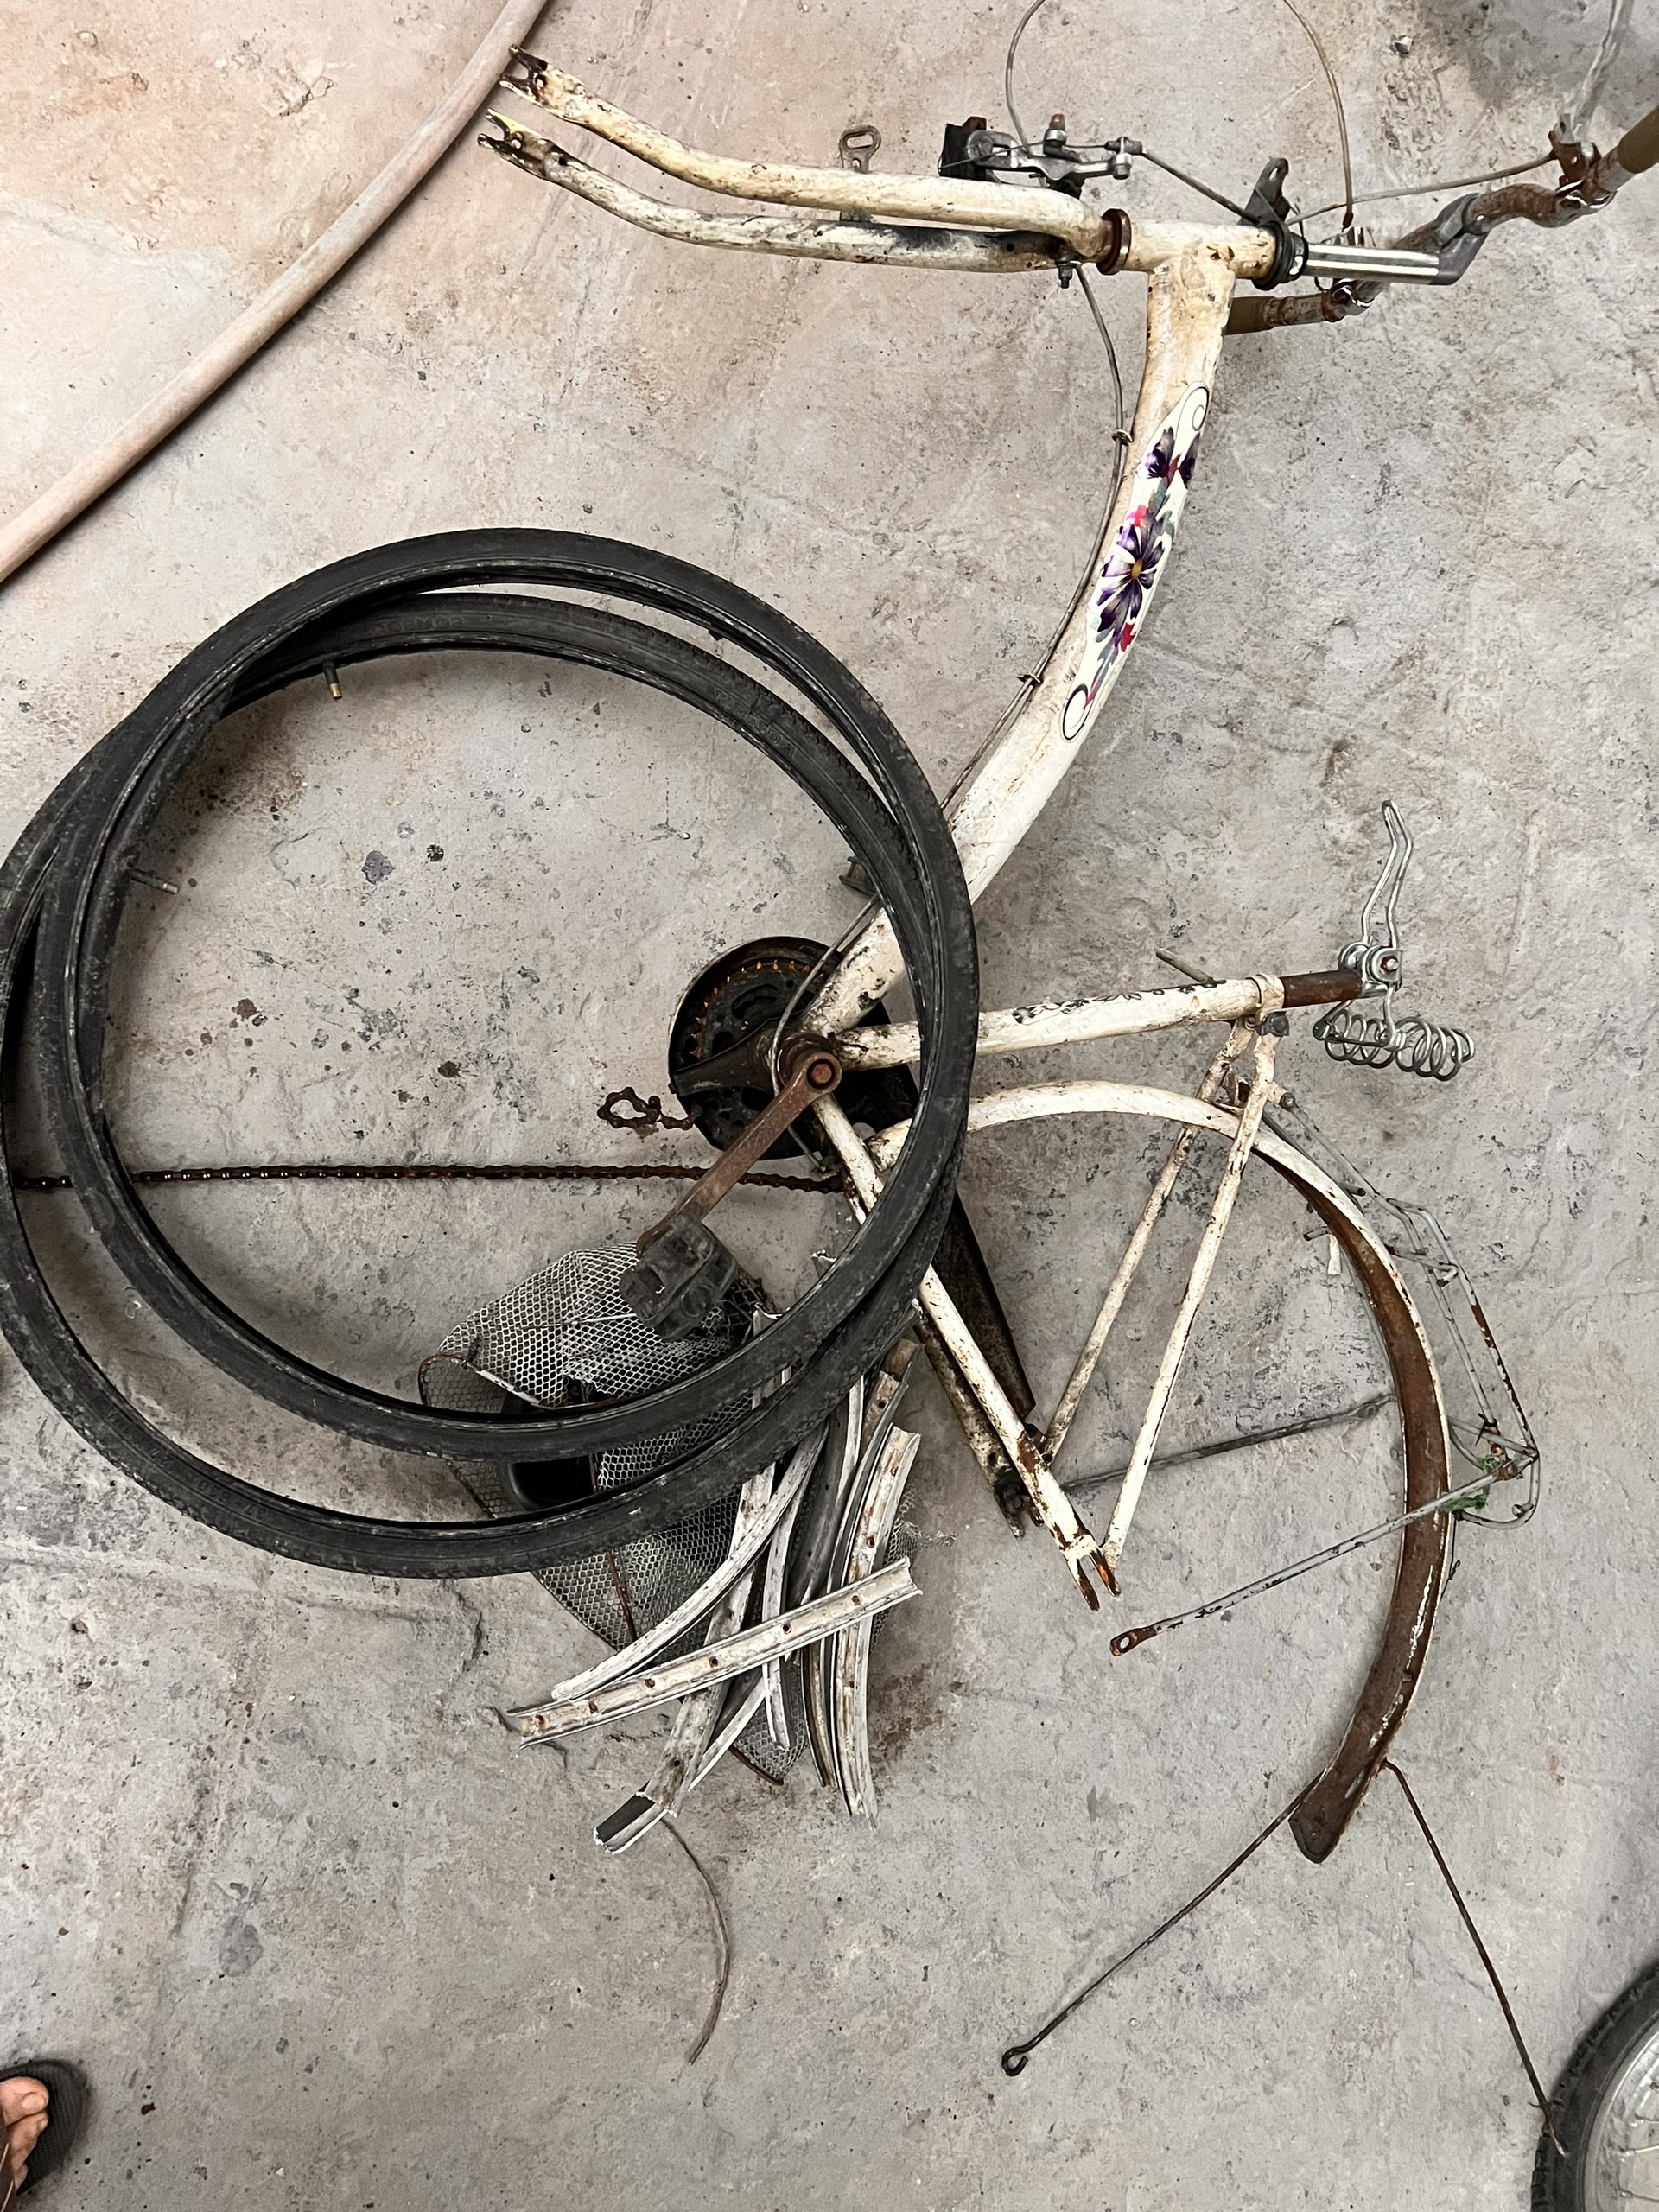 This supplied photo shows the bicycle Tran Quoc Dai used to tour around households in order to steal residential water meters.